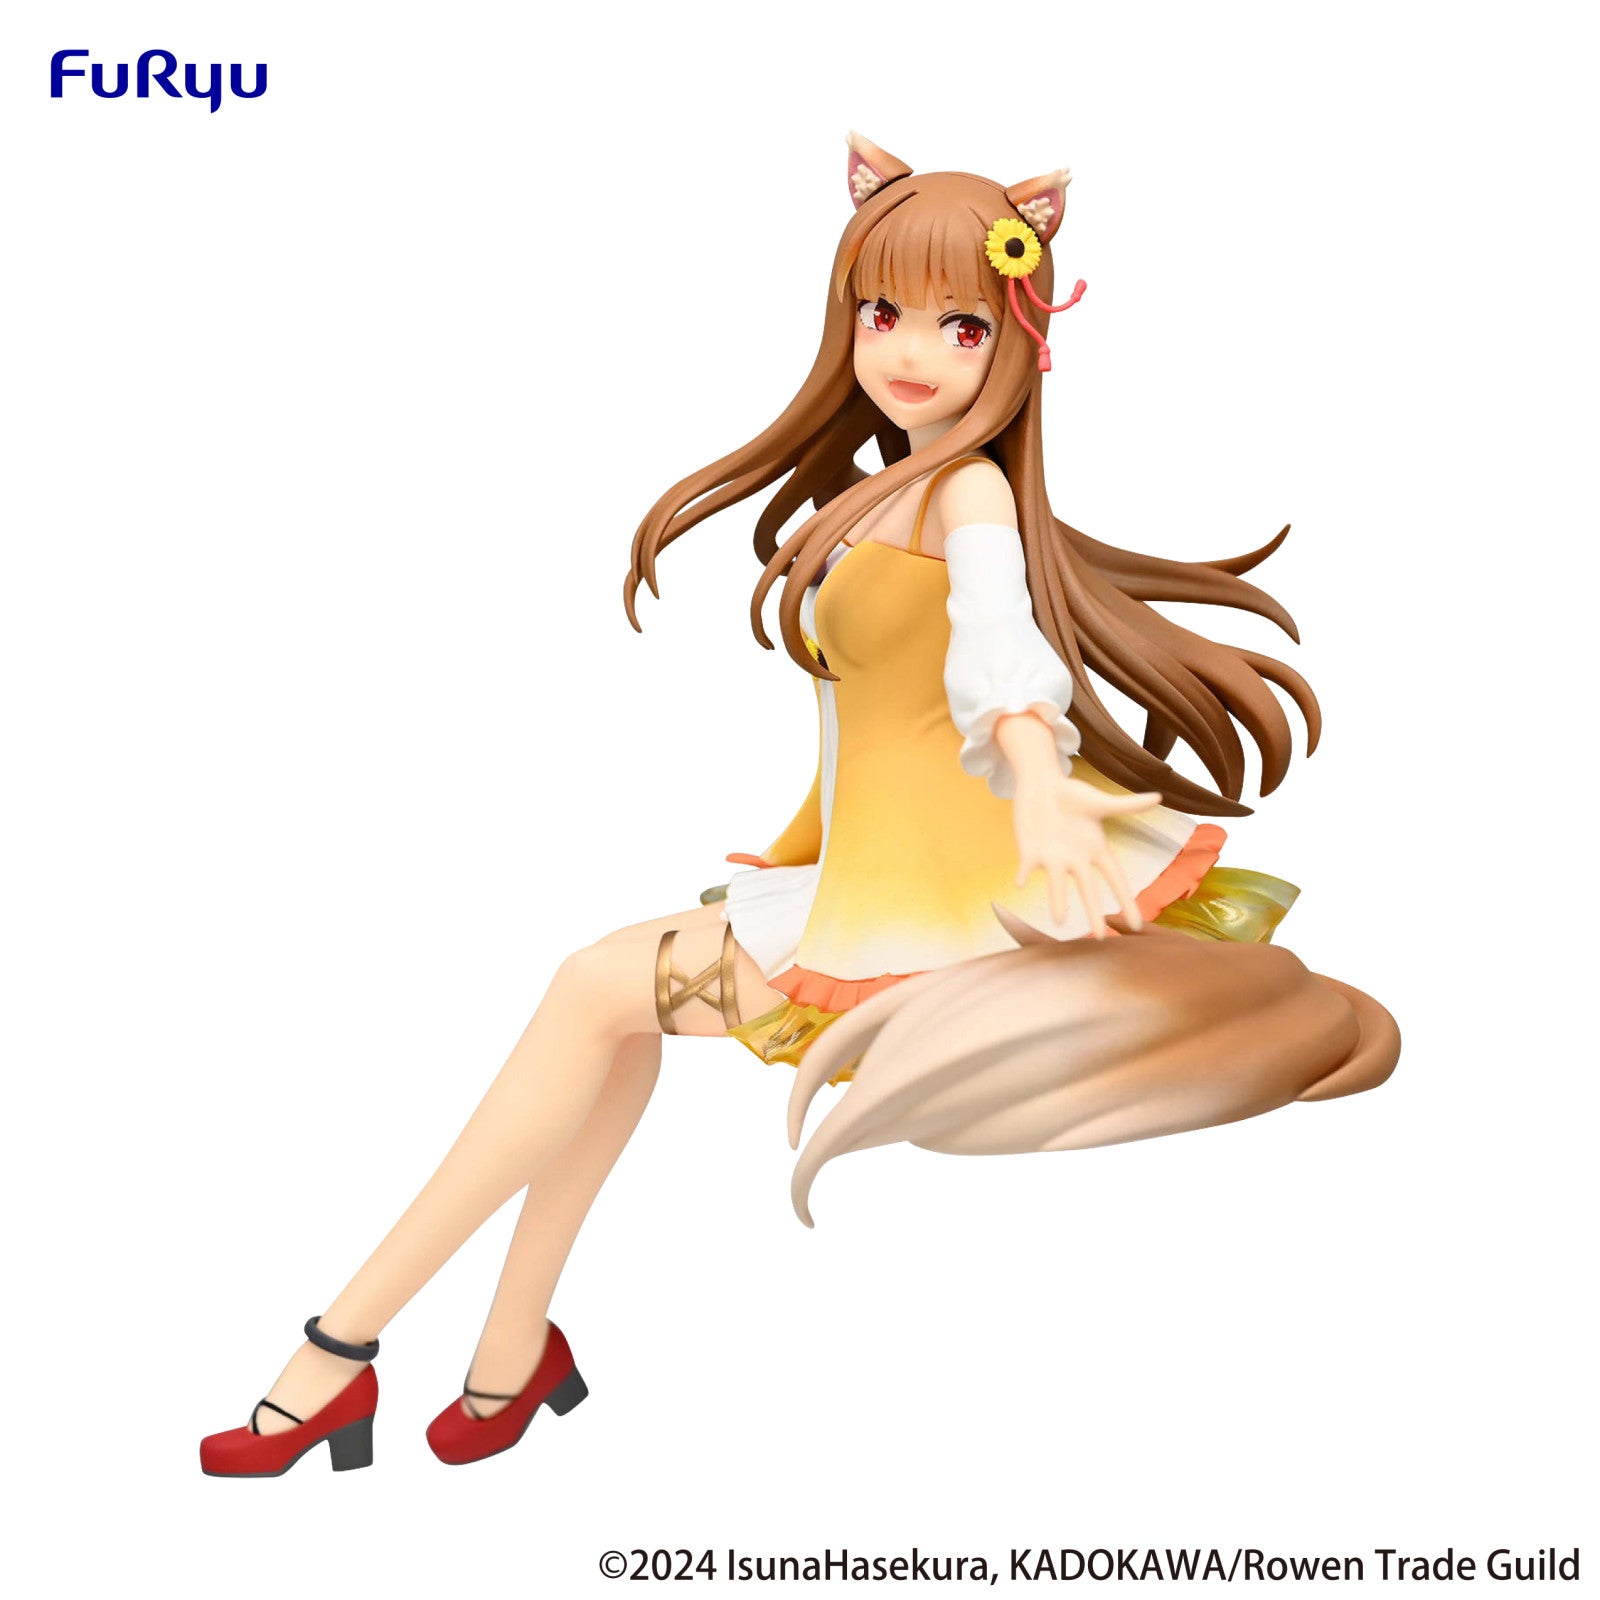 PRE ORDER Spice and Wolf: NOODLE STOPPER FIGURE - Holo (Sunflower Dress Version)